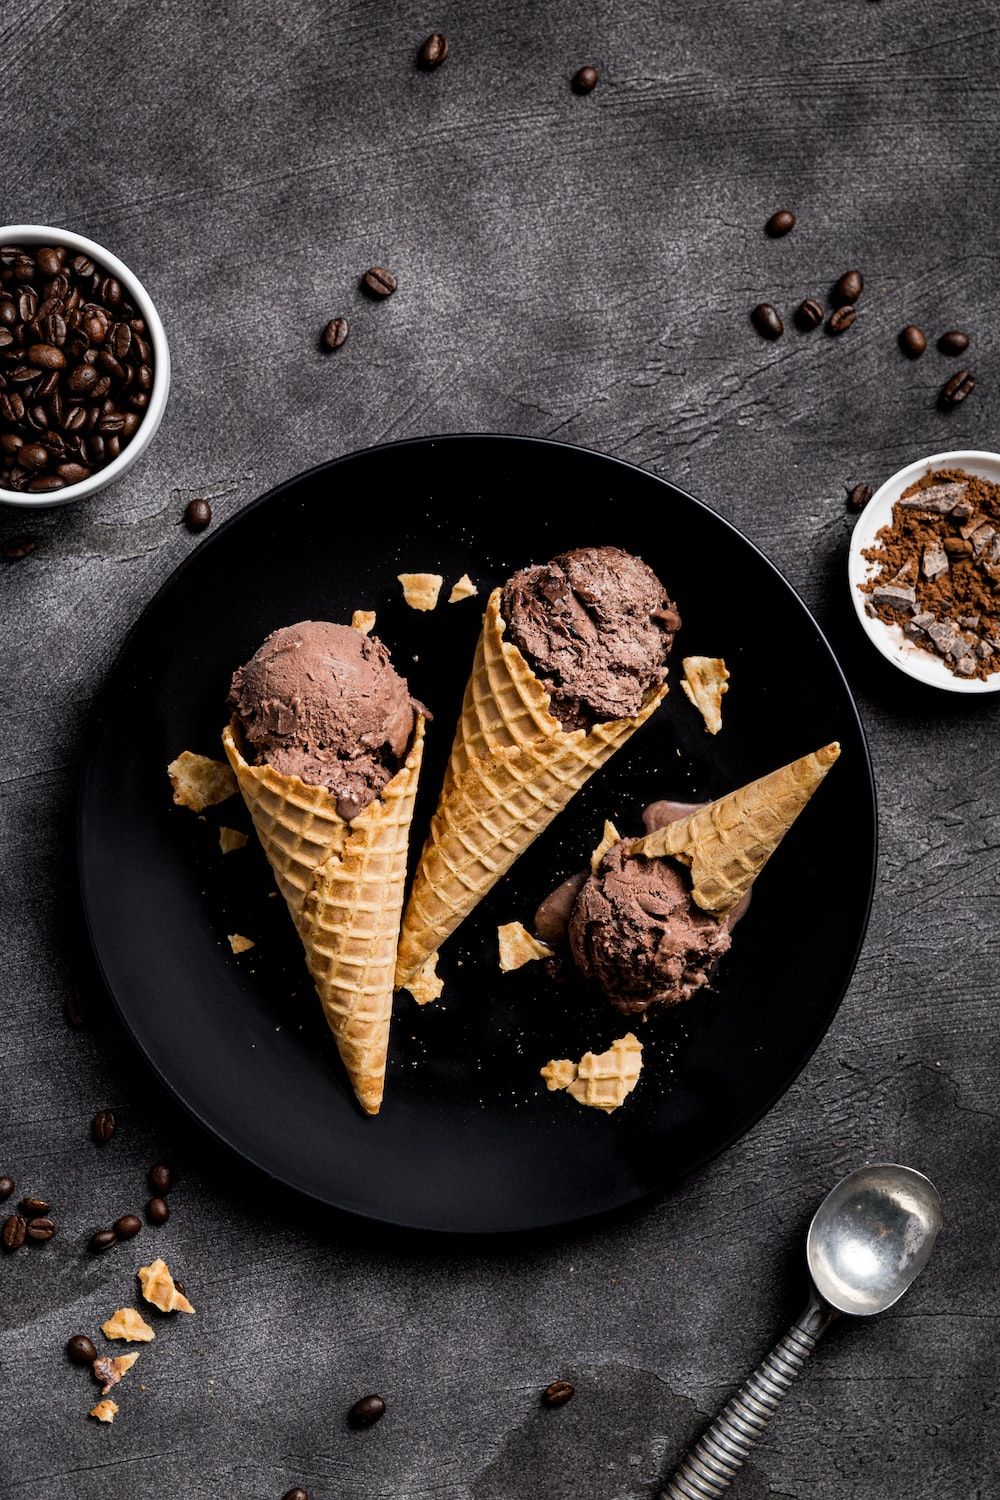 1K+ Chocolate Ice Cream Picture. Download Free Image